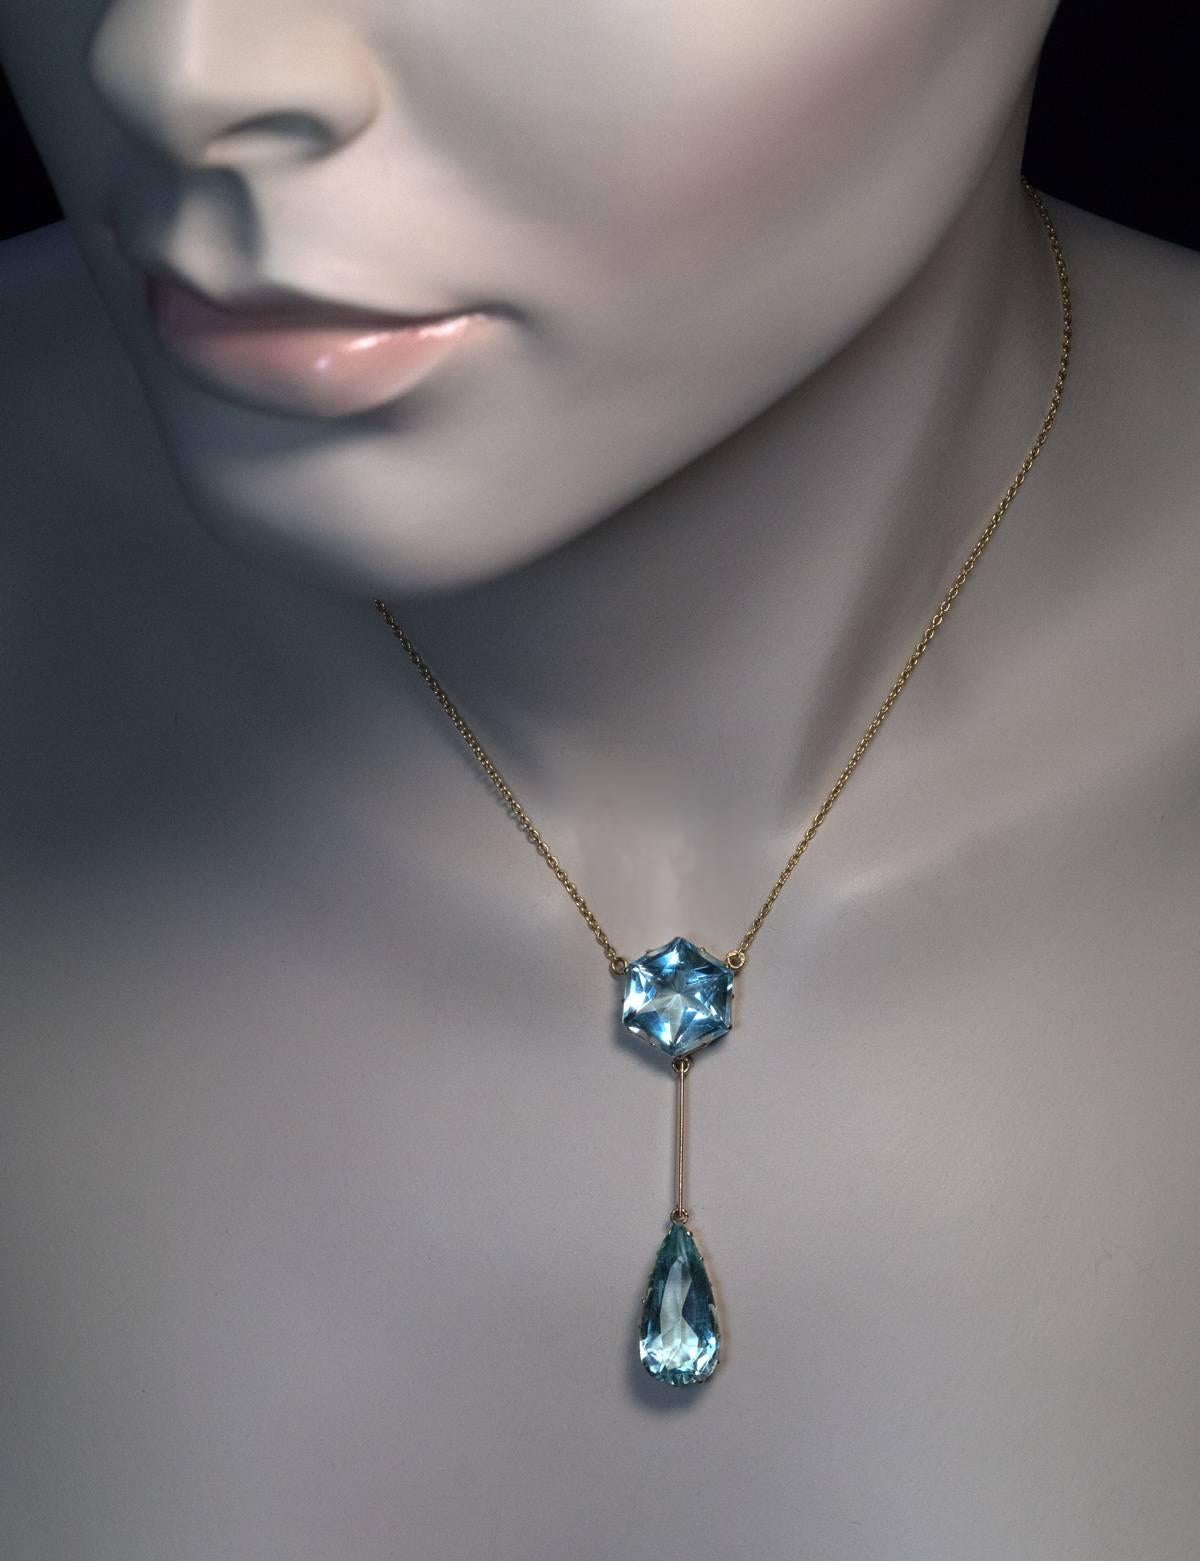 Made in Moscow between 1908 and 1917

A 14K gold necklace features two aquamarines:

One hexagonal  – 13.7 x 13.7 x 8.7 mm, approximately 10.21 ct.

One drop shaped – 20.92 x 10.34 x 6.7 mm, approximately 7.15 ct.

Marked with 56 zolotnik